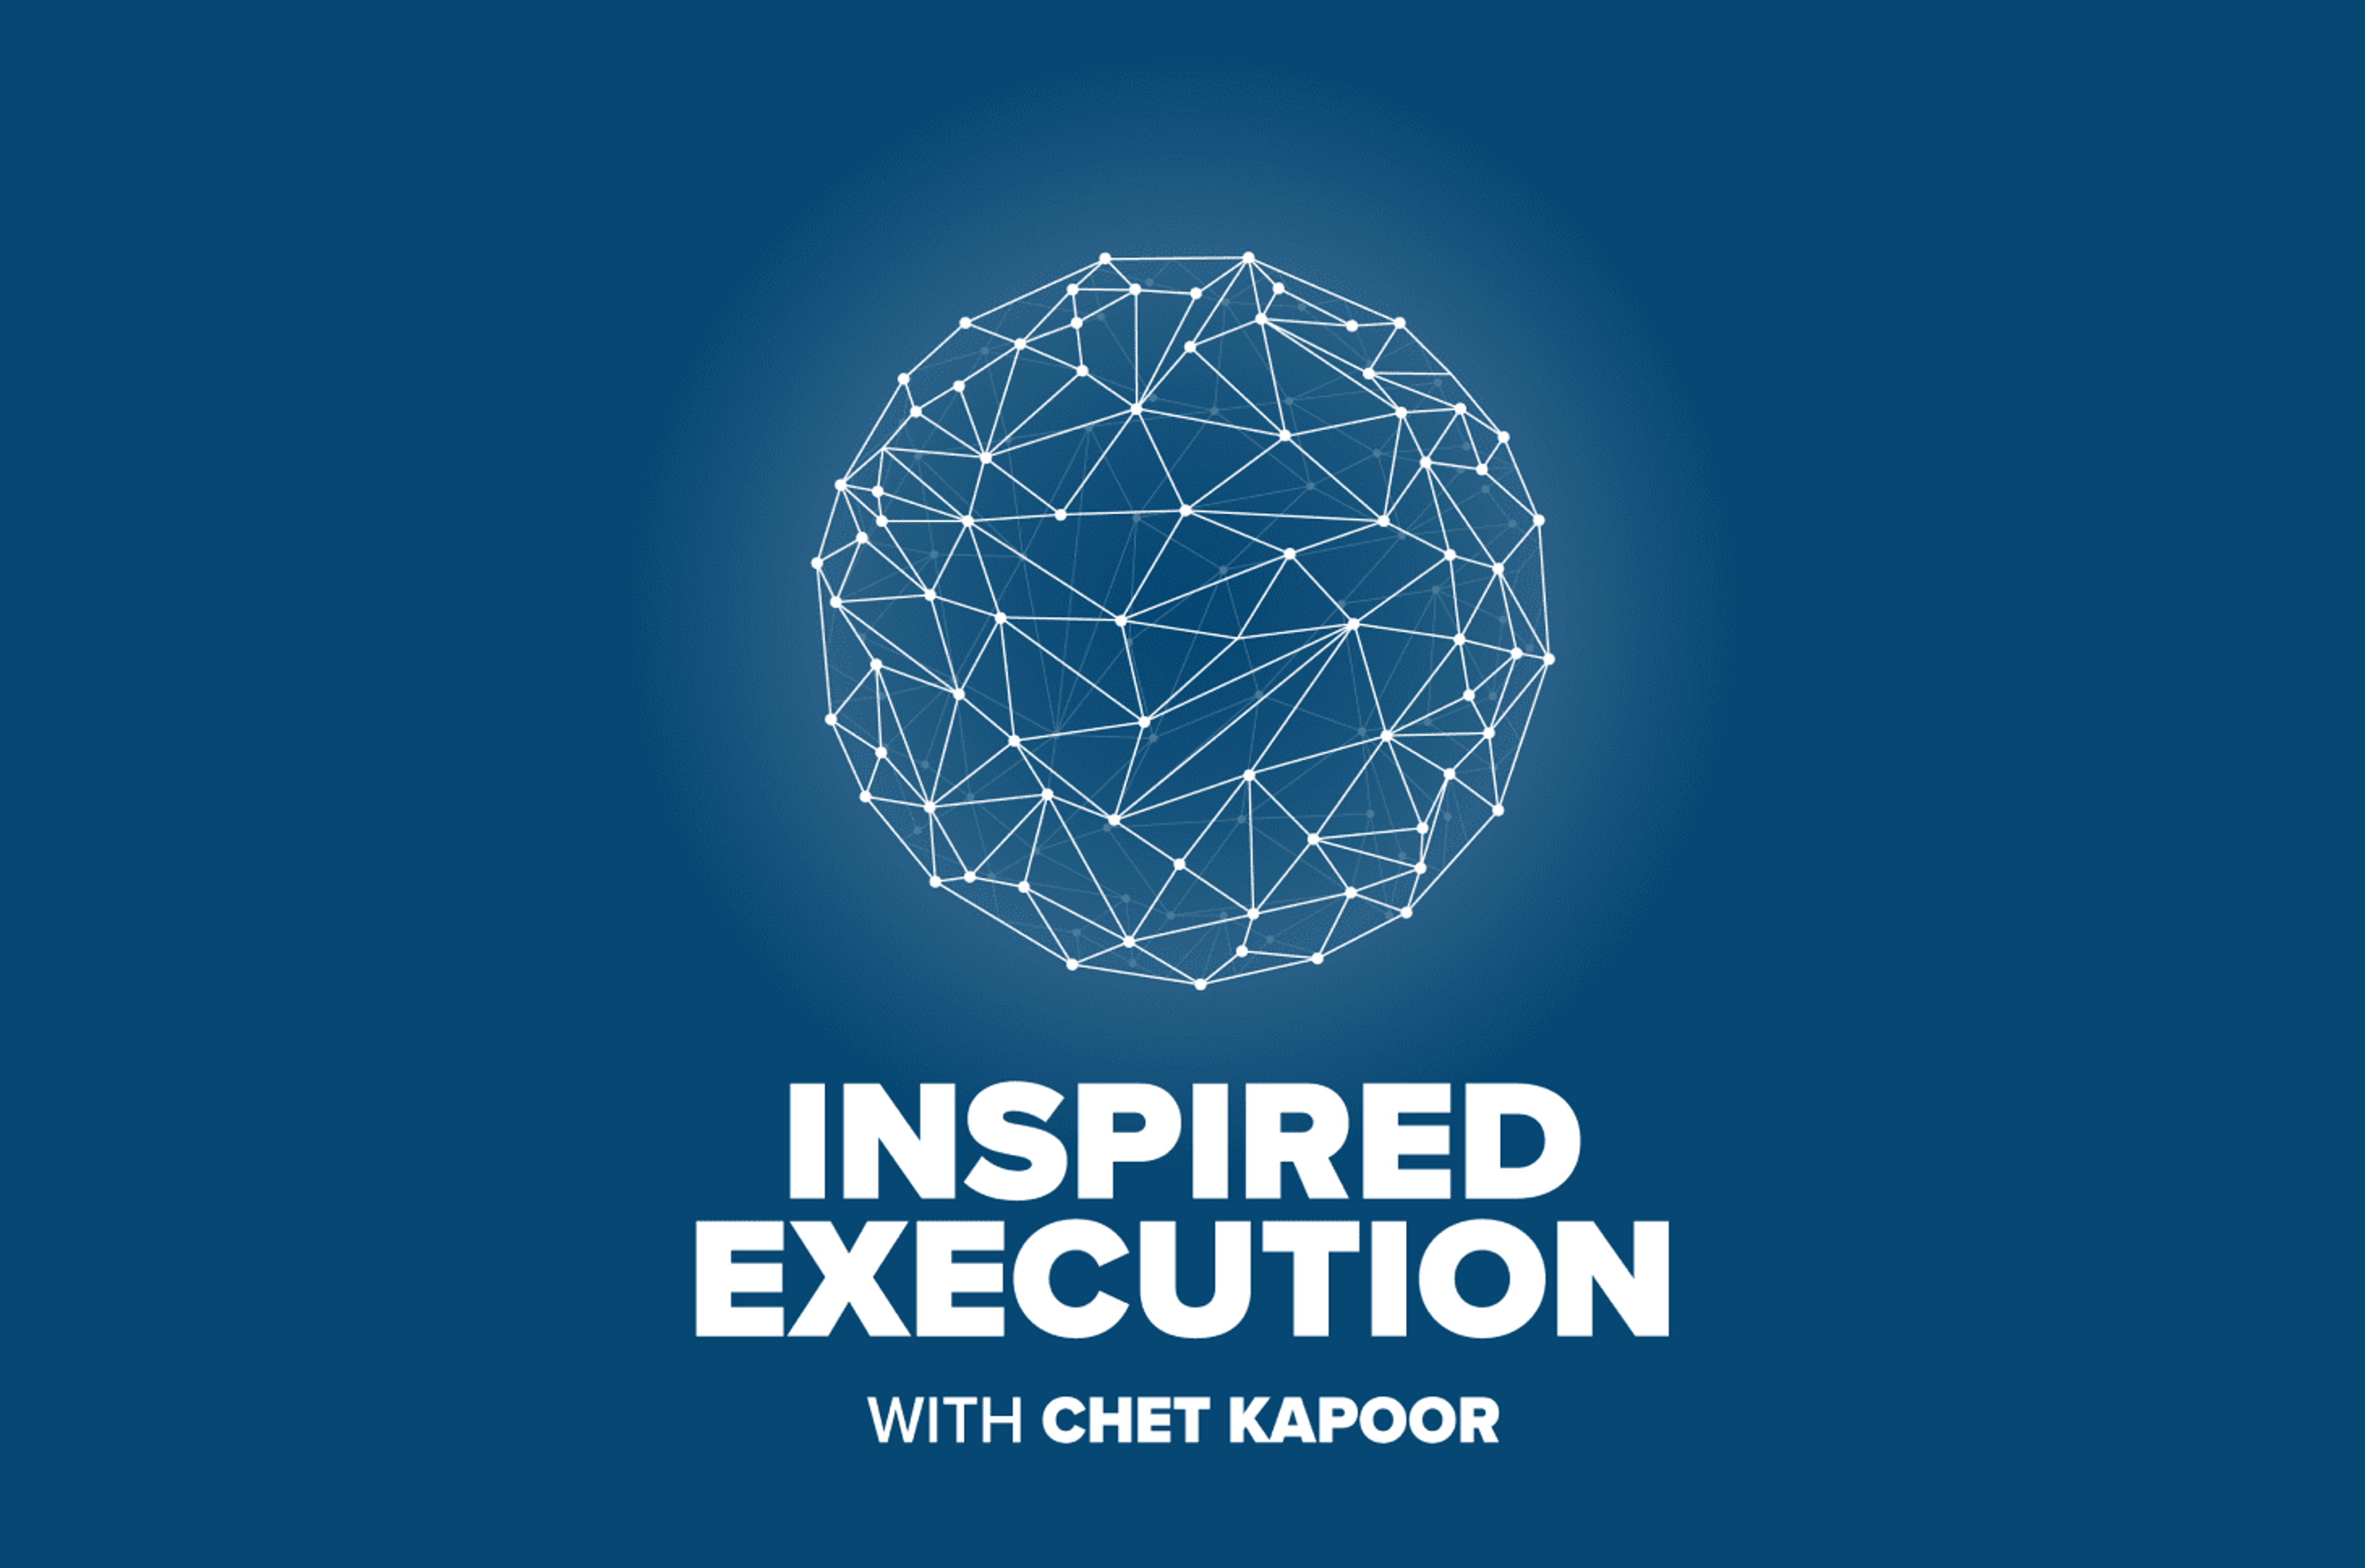 Listen to Advice Technology Leaders Would Give Their Younger Selves on Inspired Execution